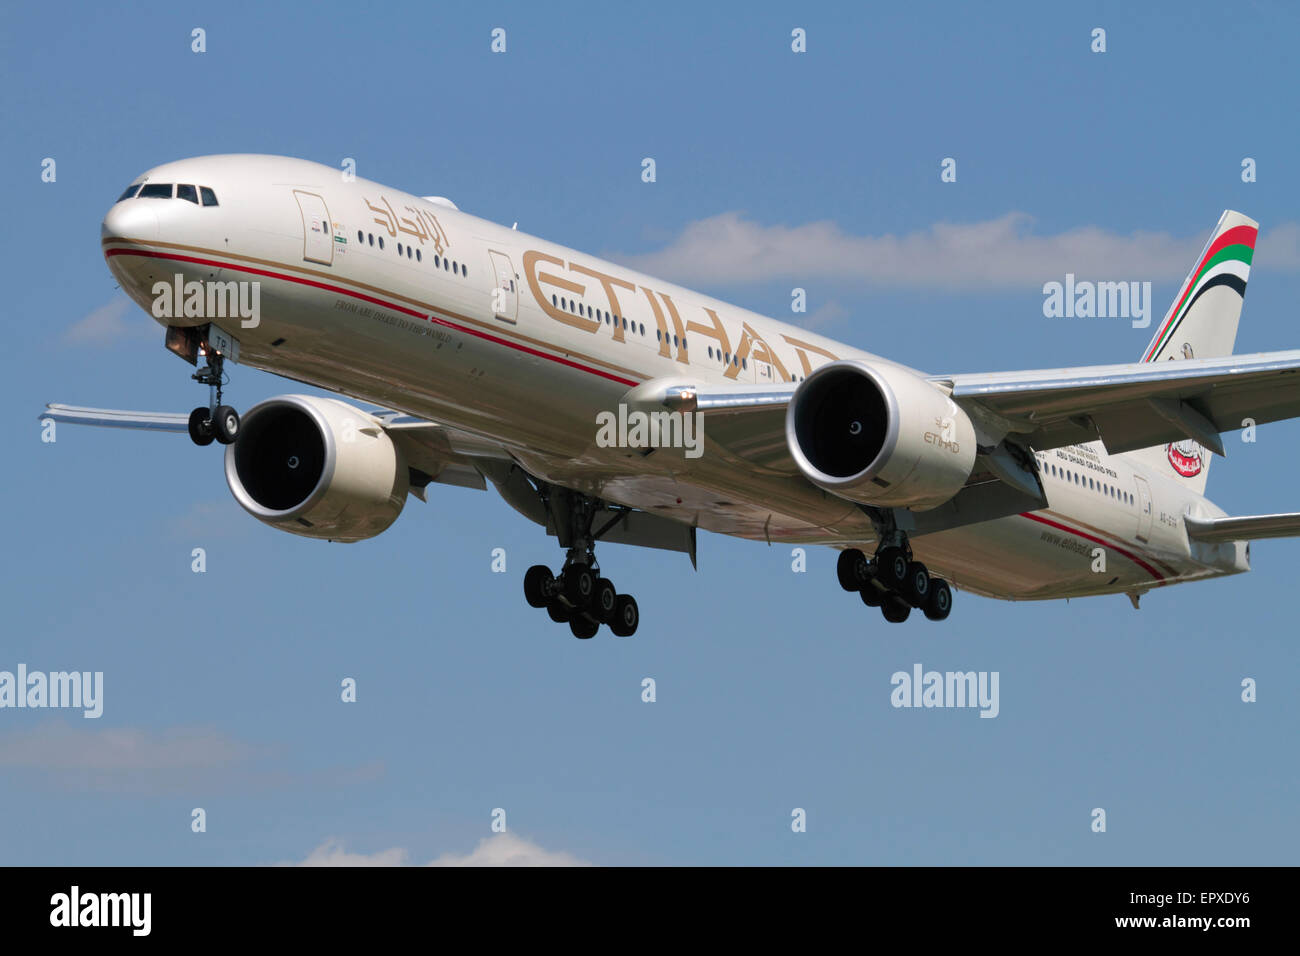 Boeing 777-300ER long-haul widebody airliner belonging to Abu Dhabi airline Etihad on approach. Close-up front view. Stock Photo